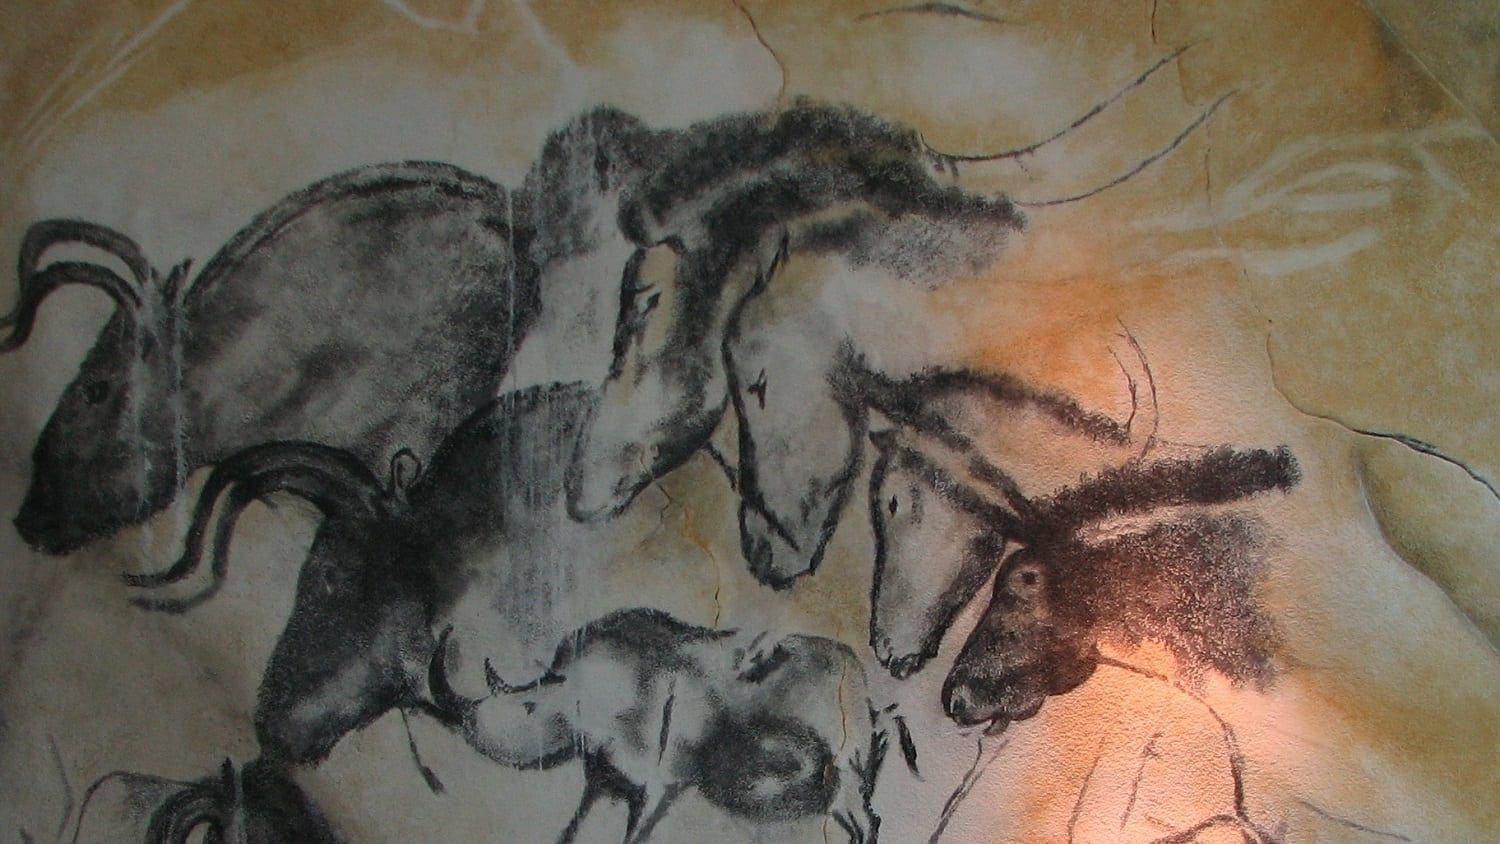 Replica of the "Horse Panel" painting in the Chauvet Cave, France